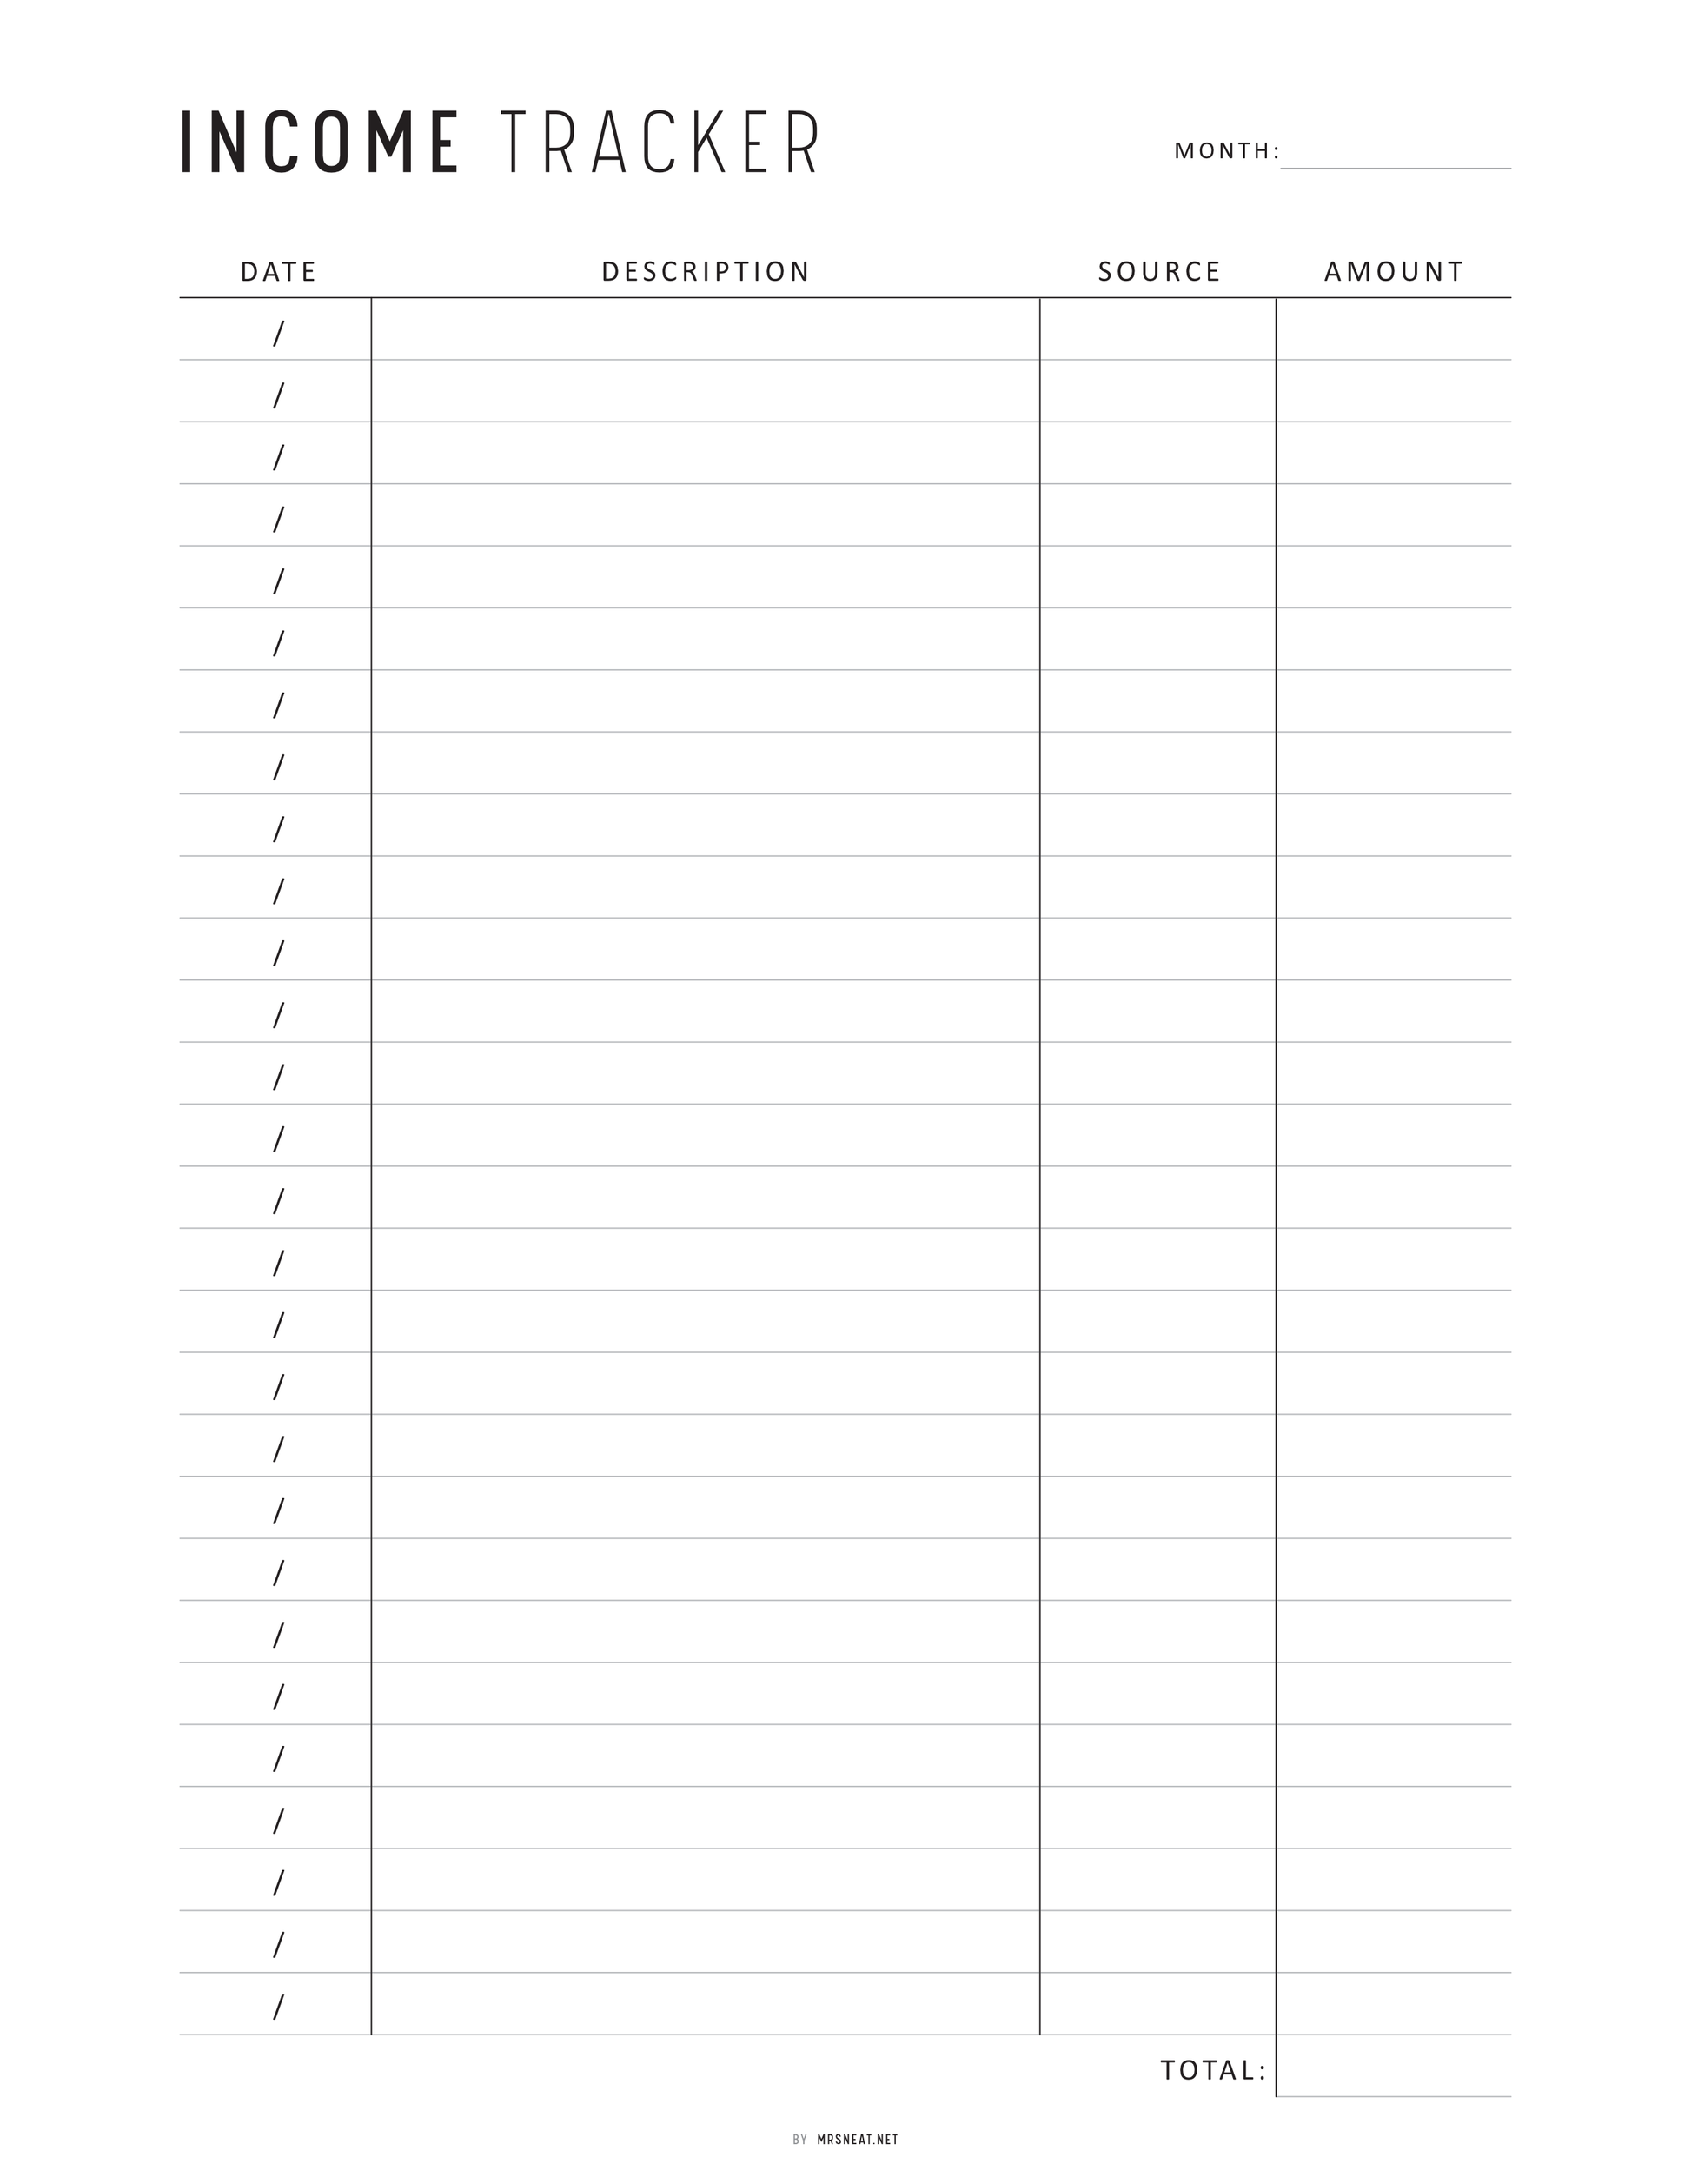 Income Tracker Printable, A4, A5, Letter, Half Letter, Digital Income Tracker, Neutral & Colorful Page